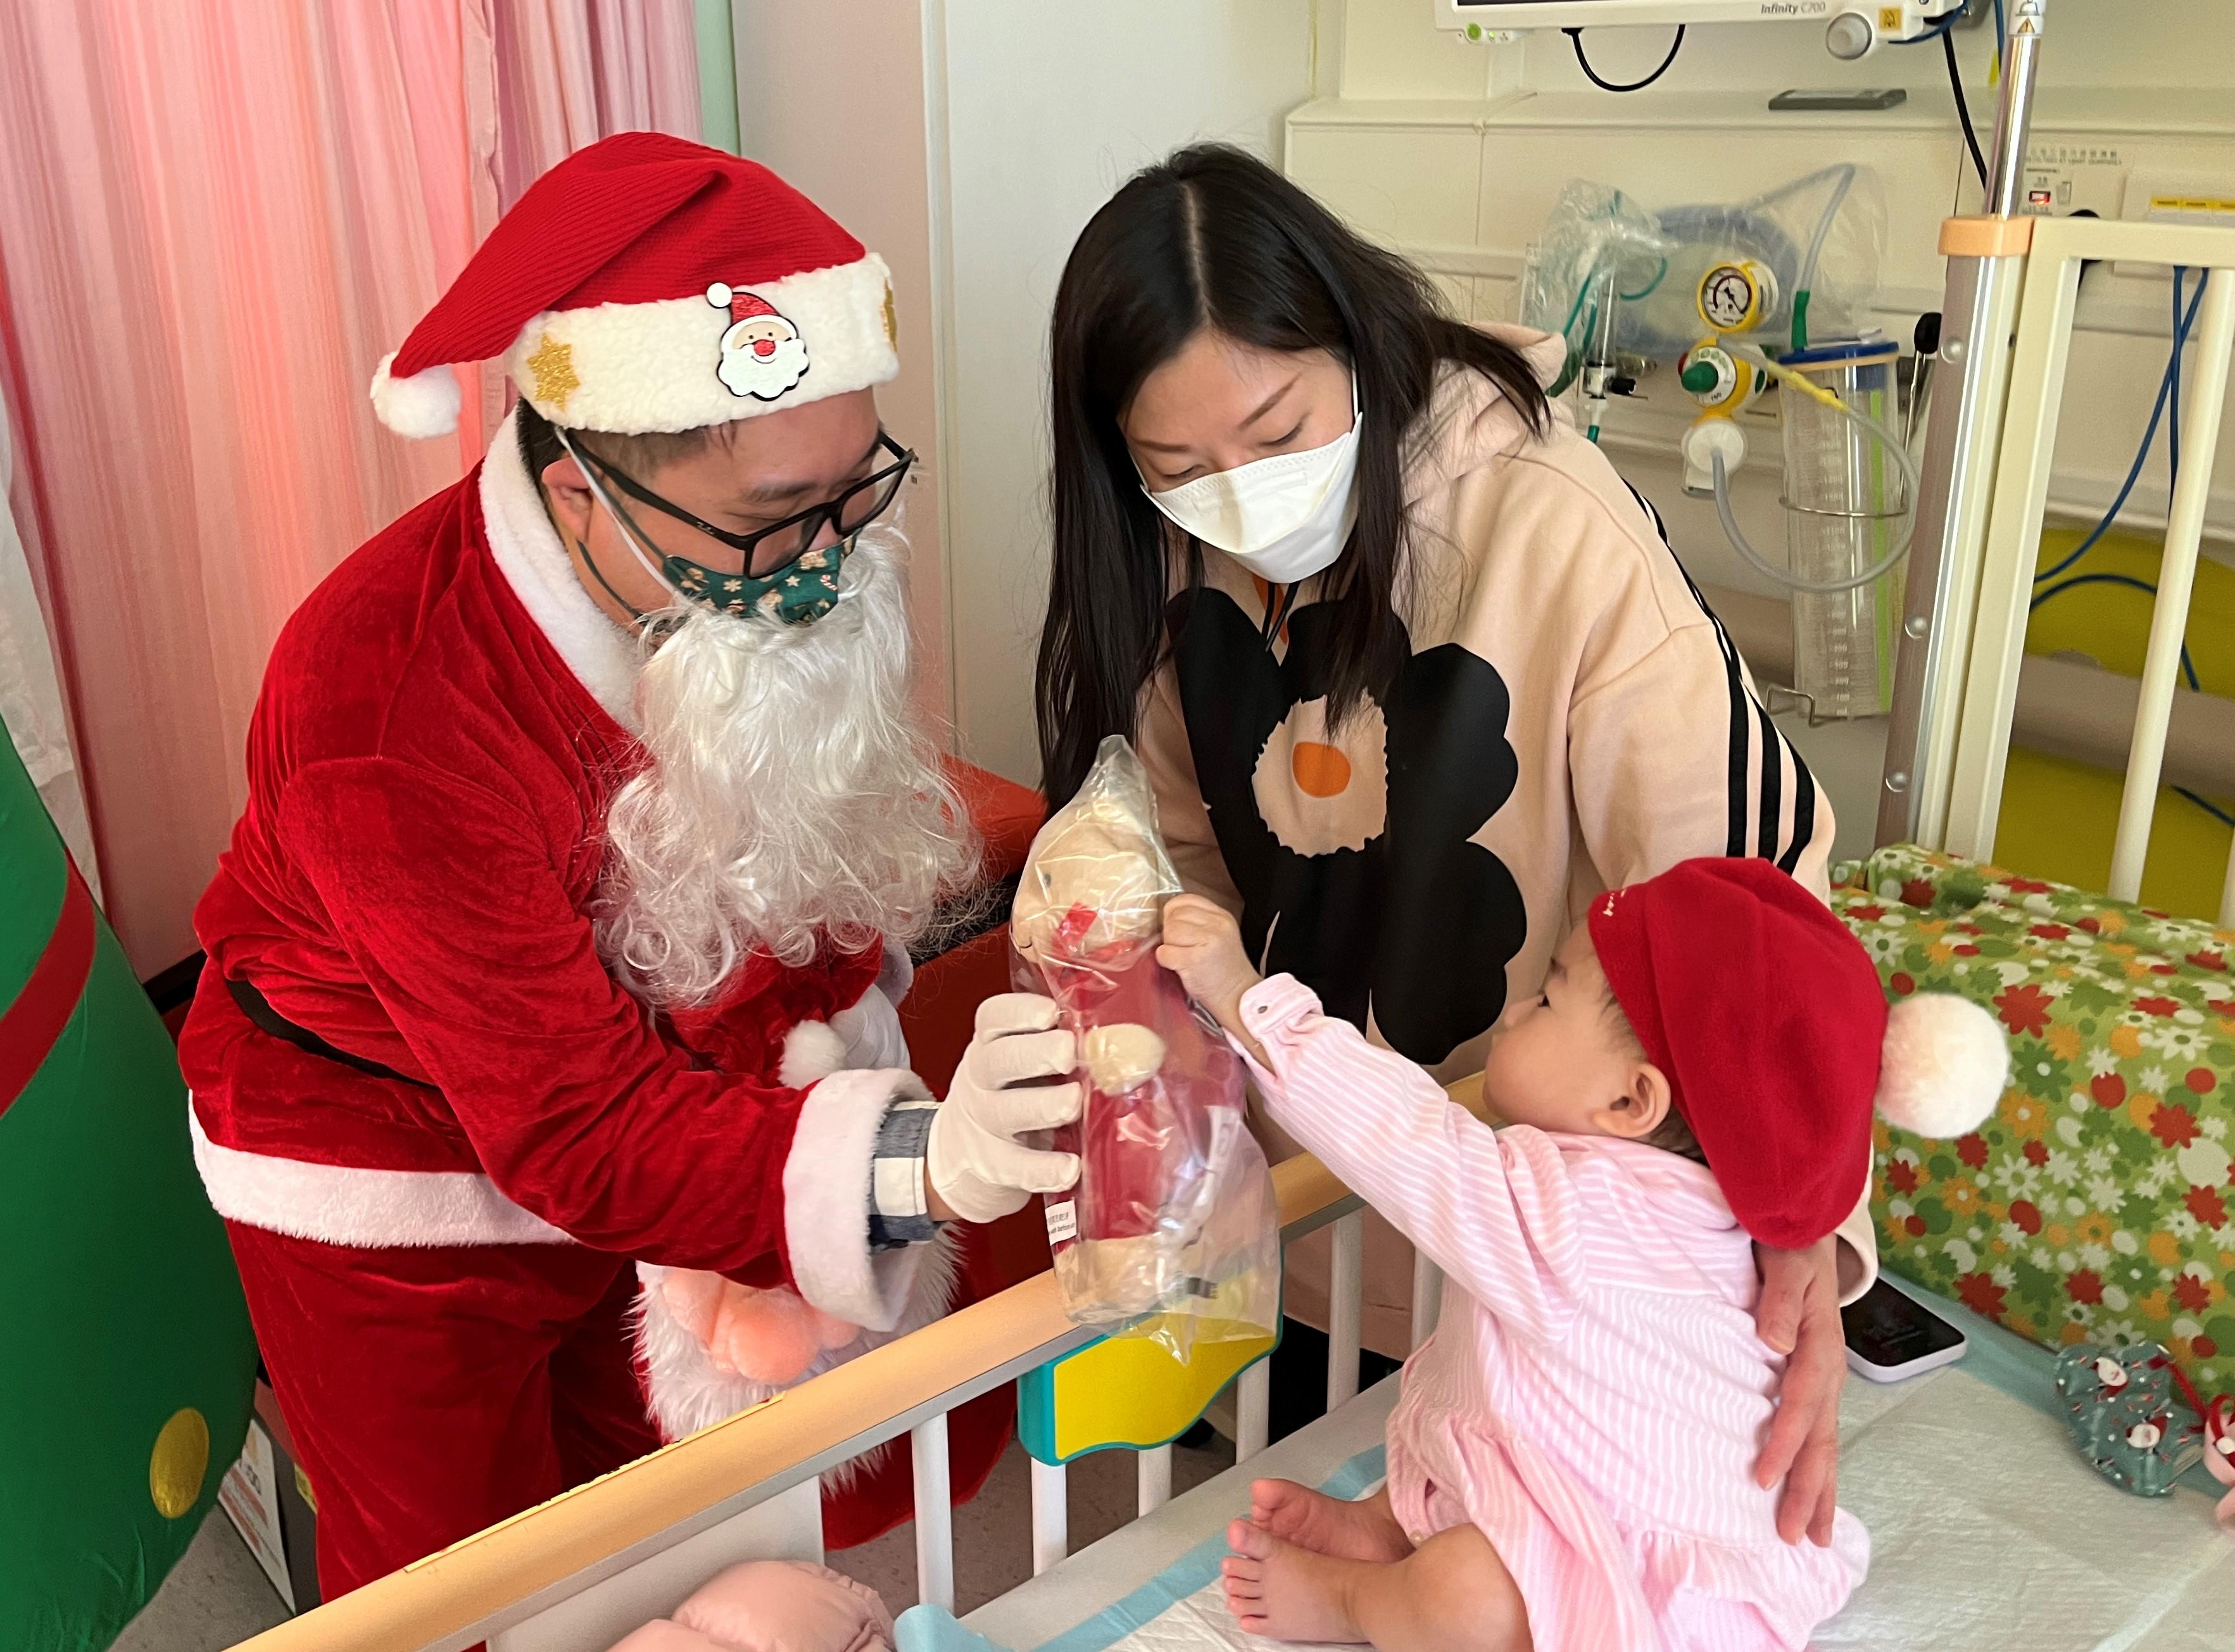 A Hong Kong Children's Hospital doctor turned into Santa Claus to deliver Christmas gifts to the children.